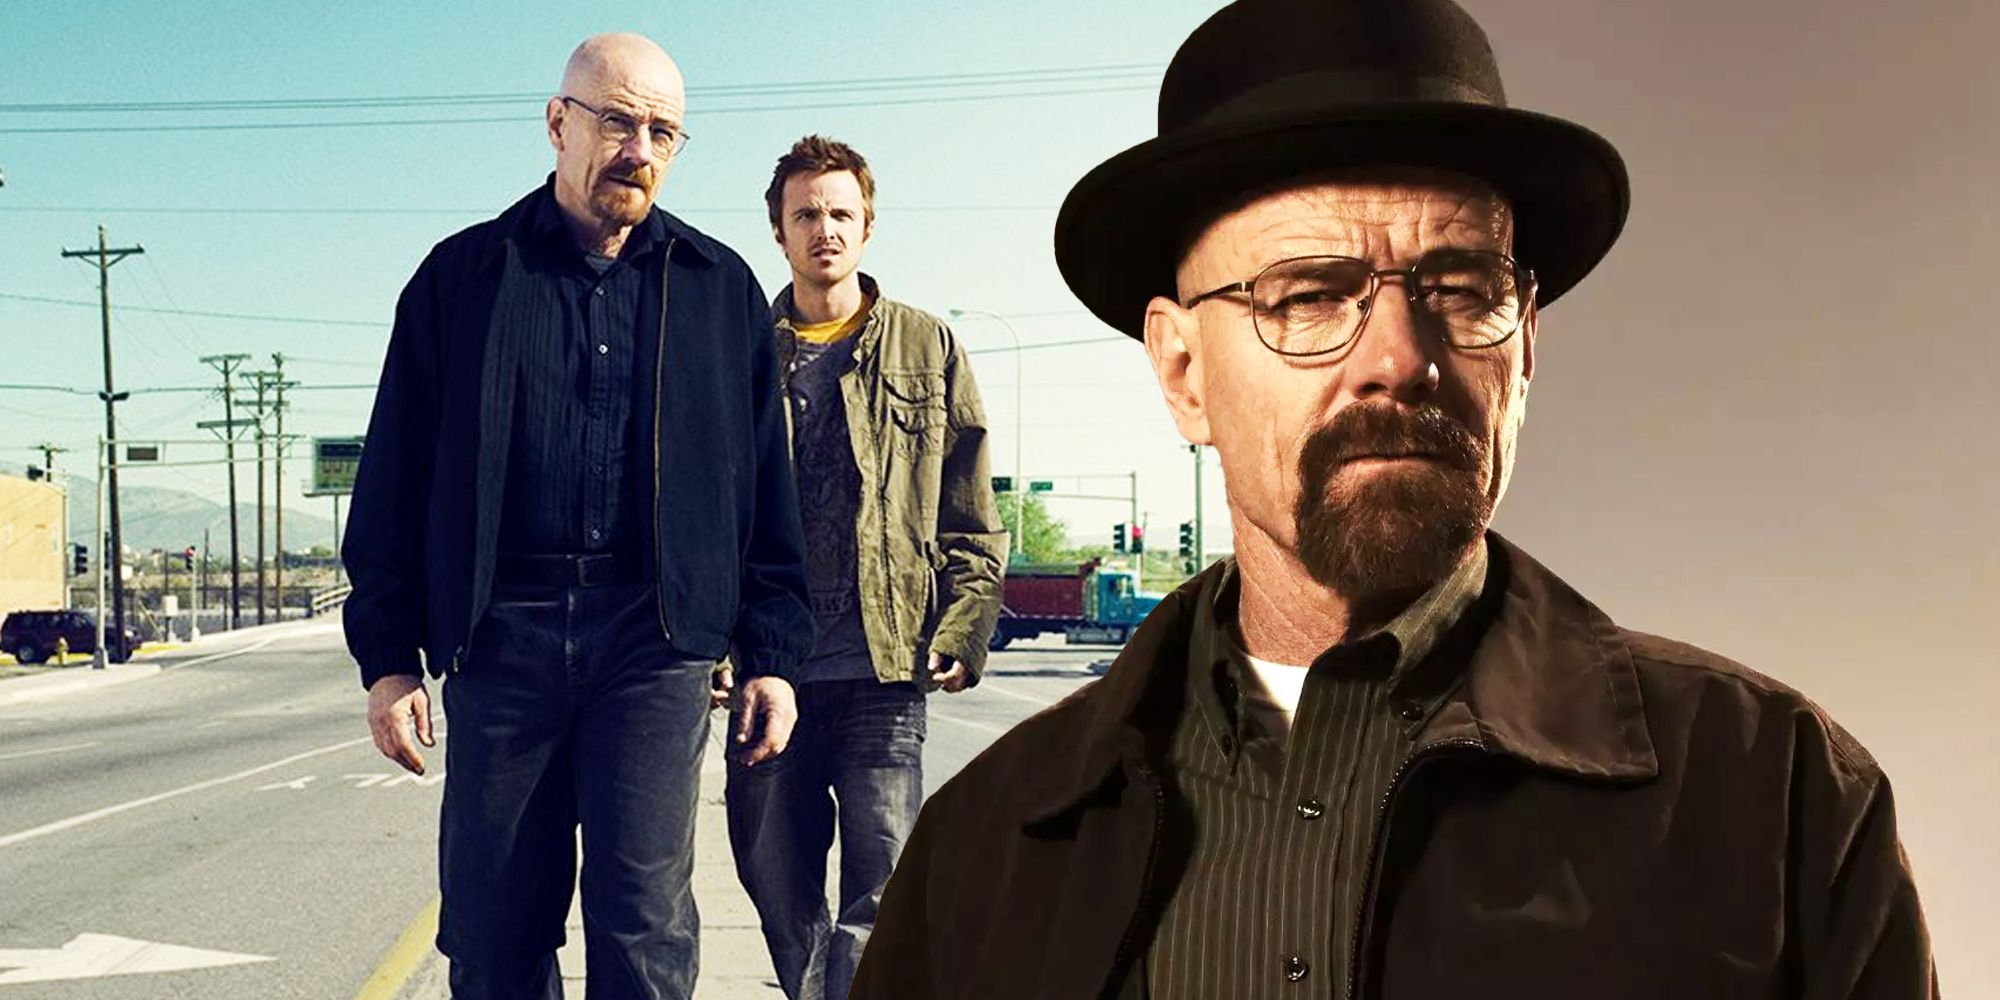 Walter White and Jesse in Albuquerque, New Mexico, in Breaking Bad